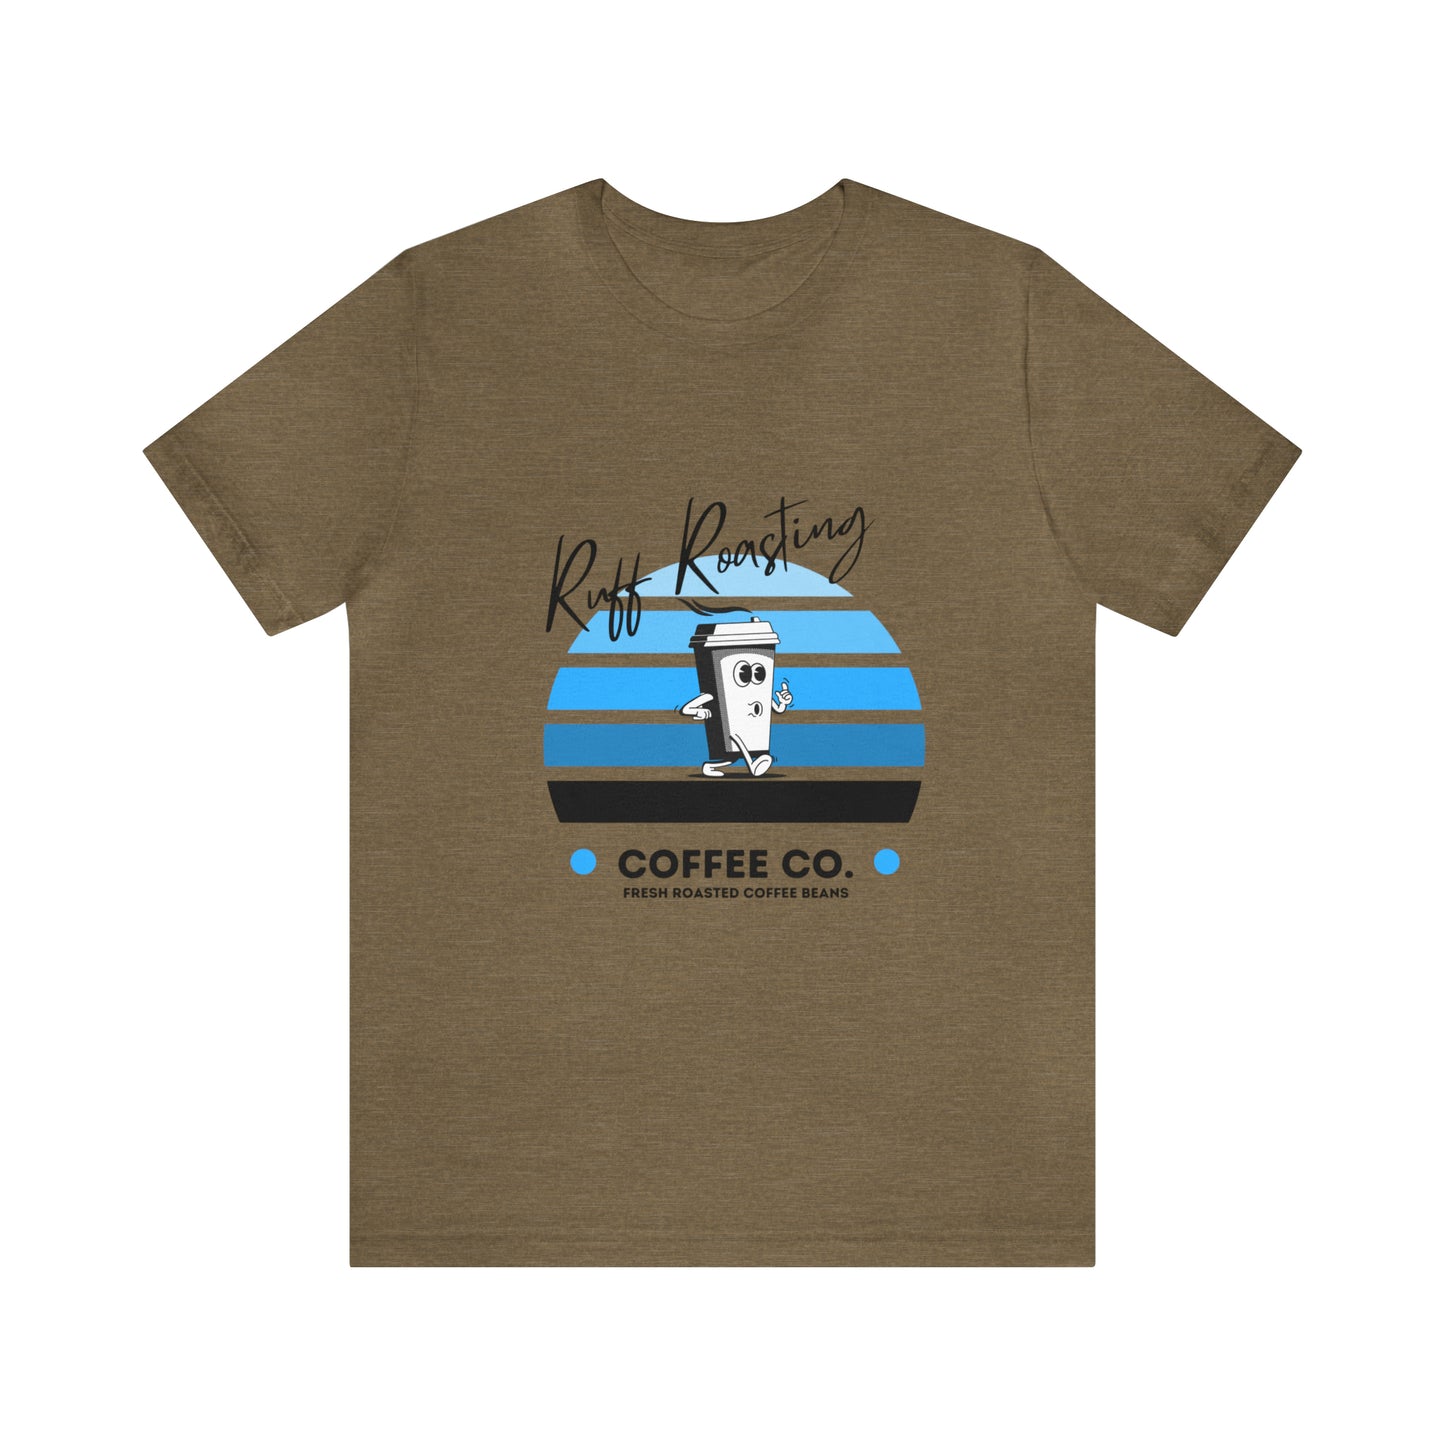 Whistle Cup Tee